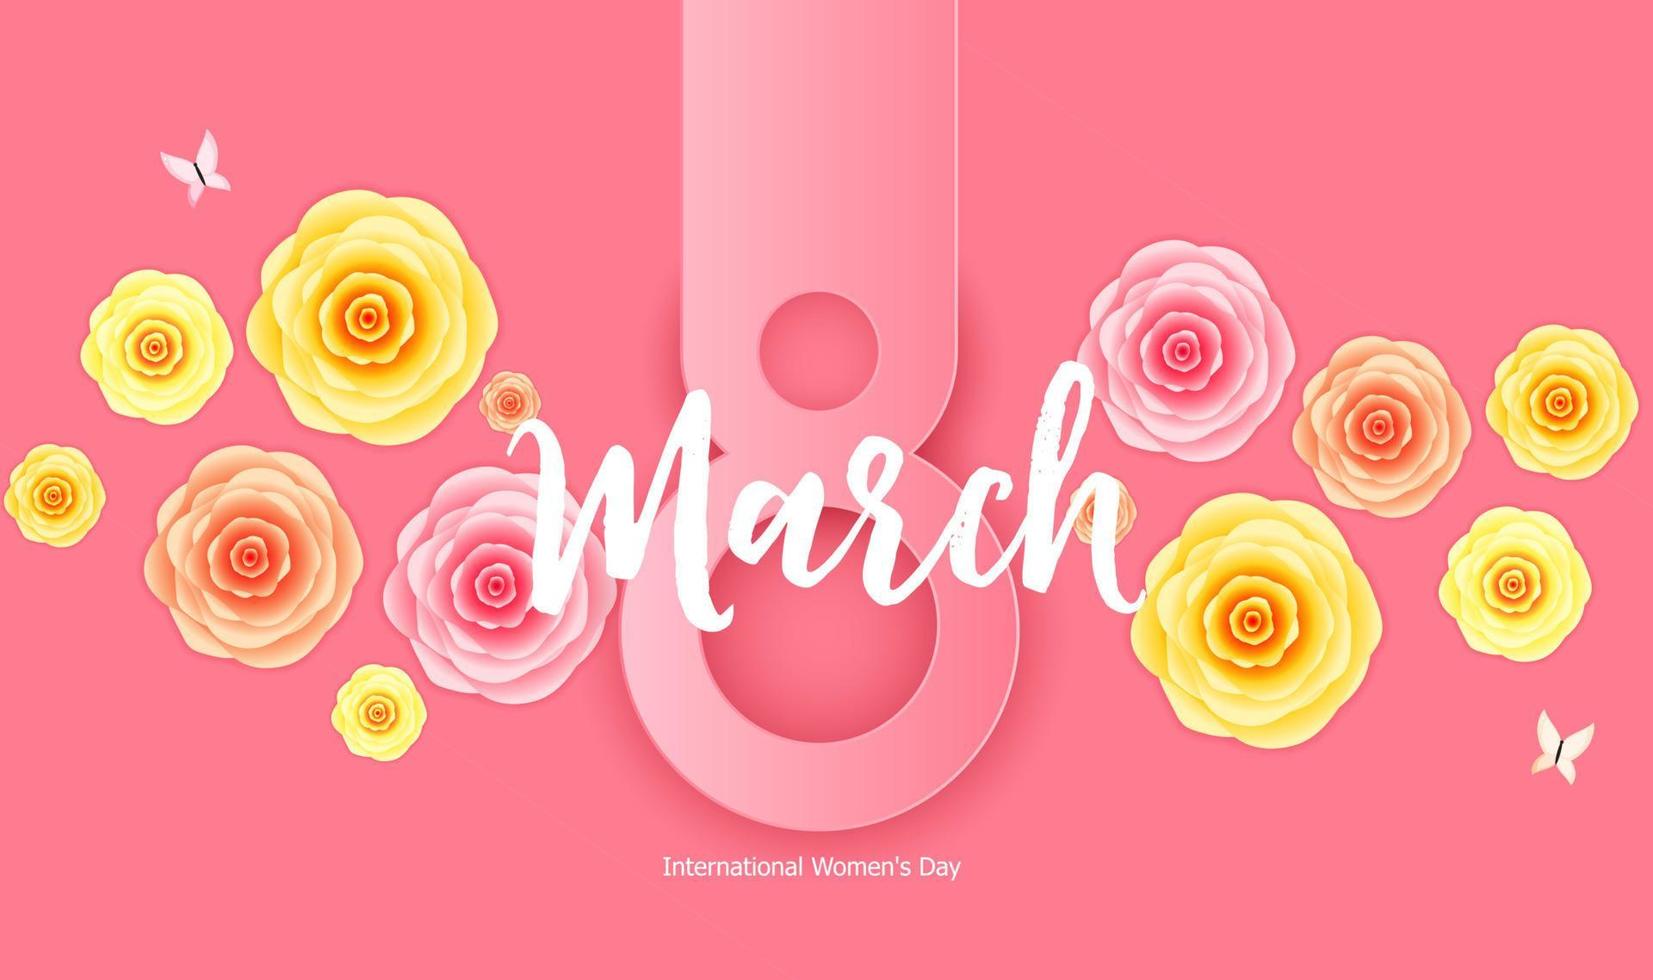 Women's Day Greeting Card 8 March Vector Illustration